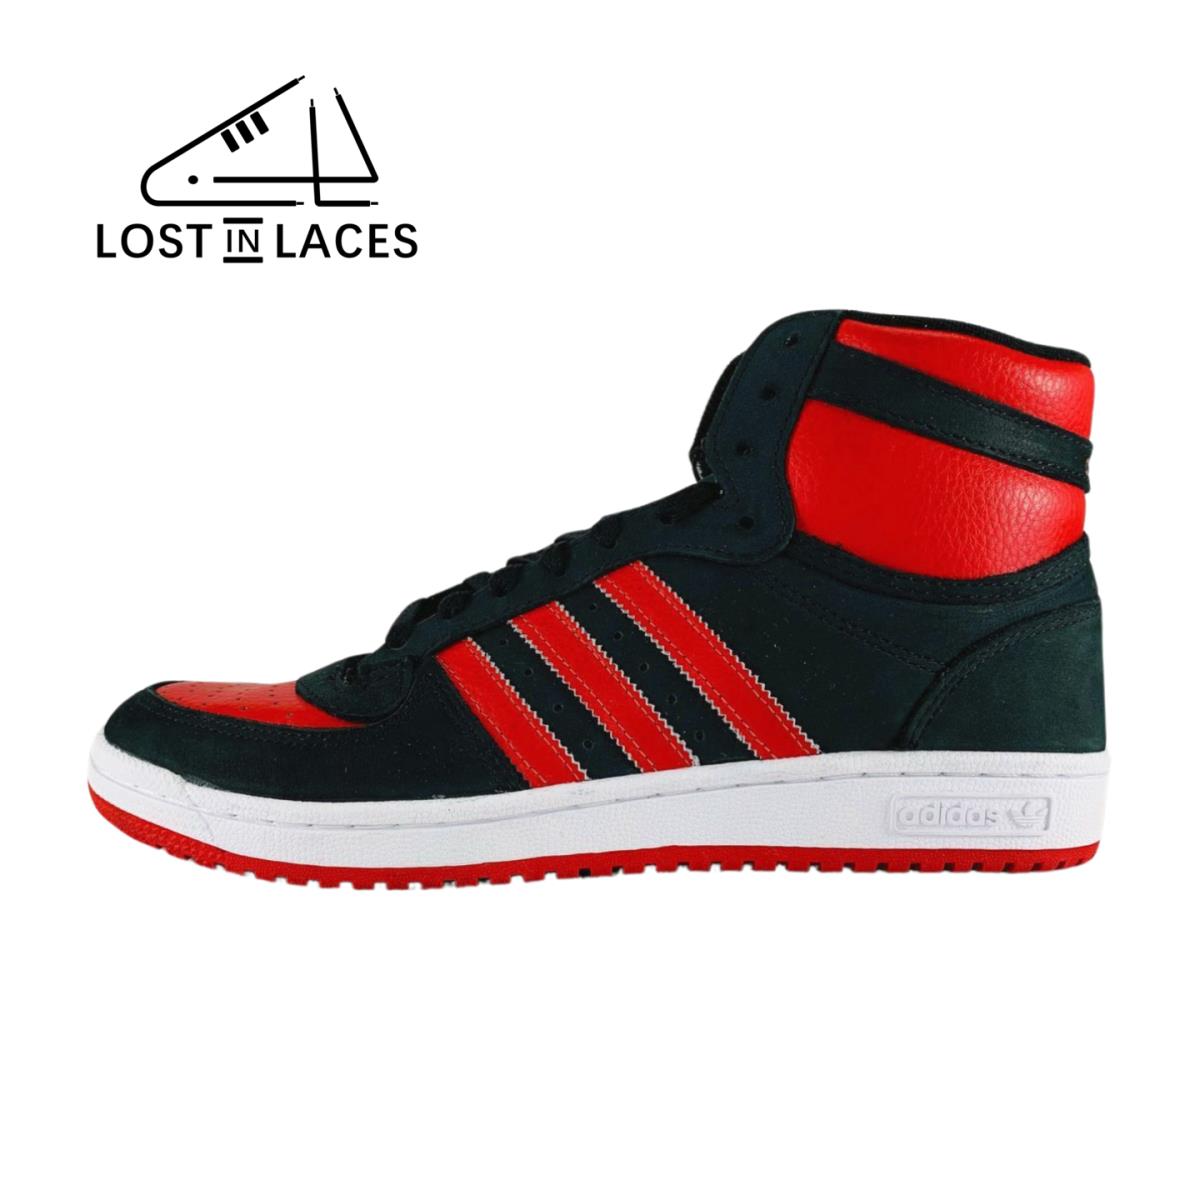 Adidas Top Ten RB Black Red Sneakers Shoes FZ6024 Men`s Sizes